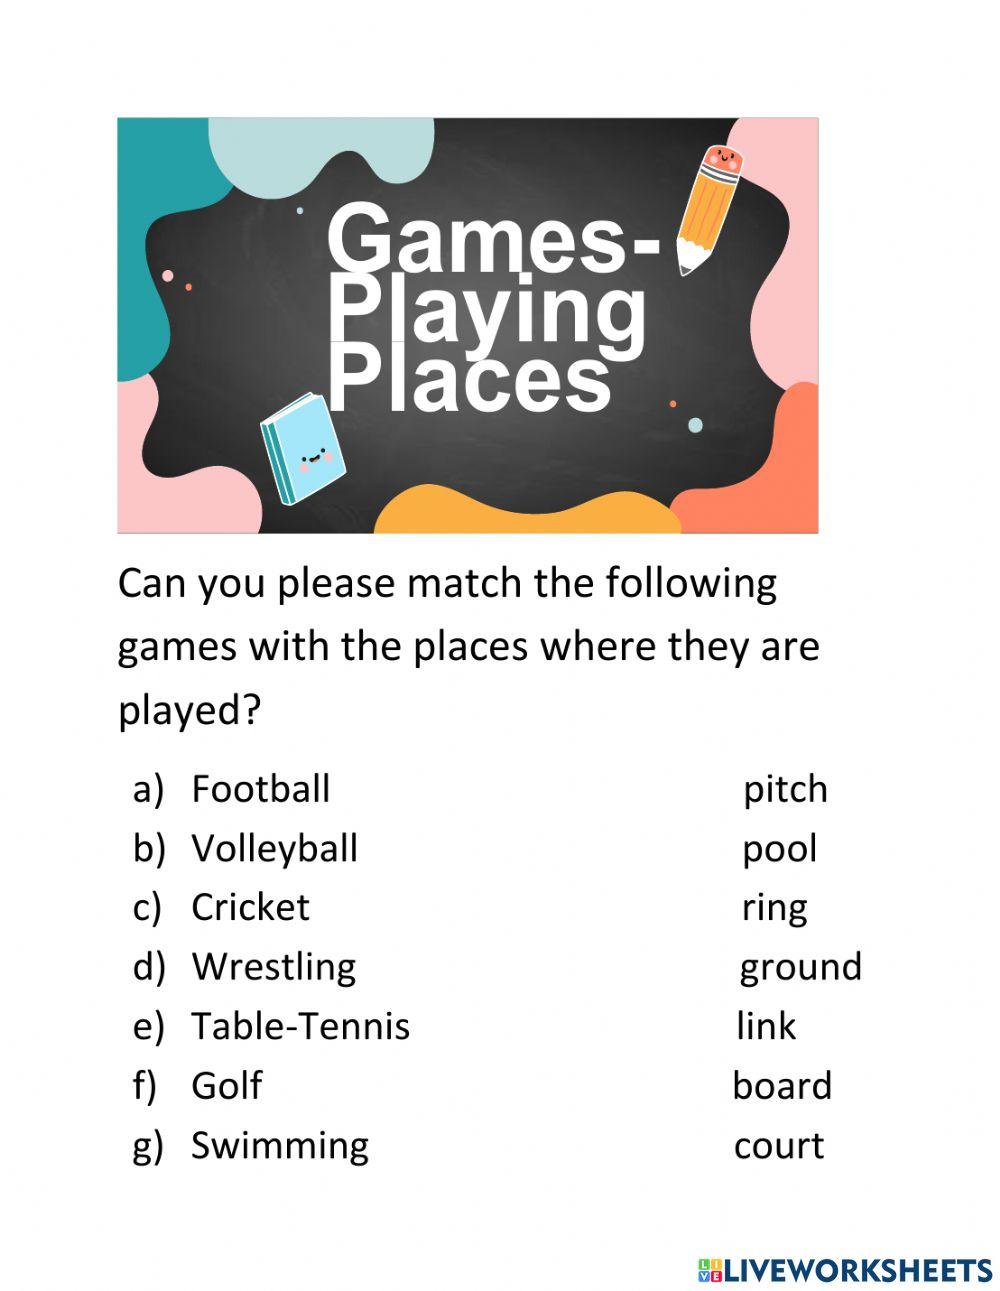 3. Games-Playing Places